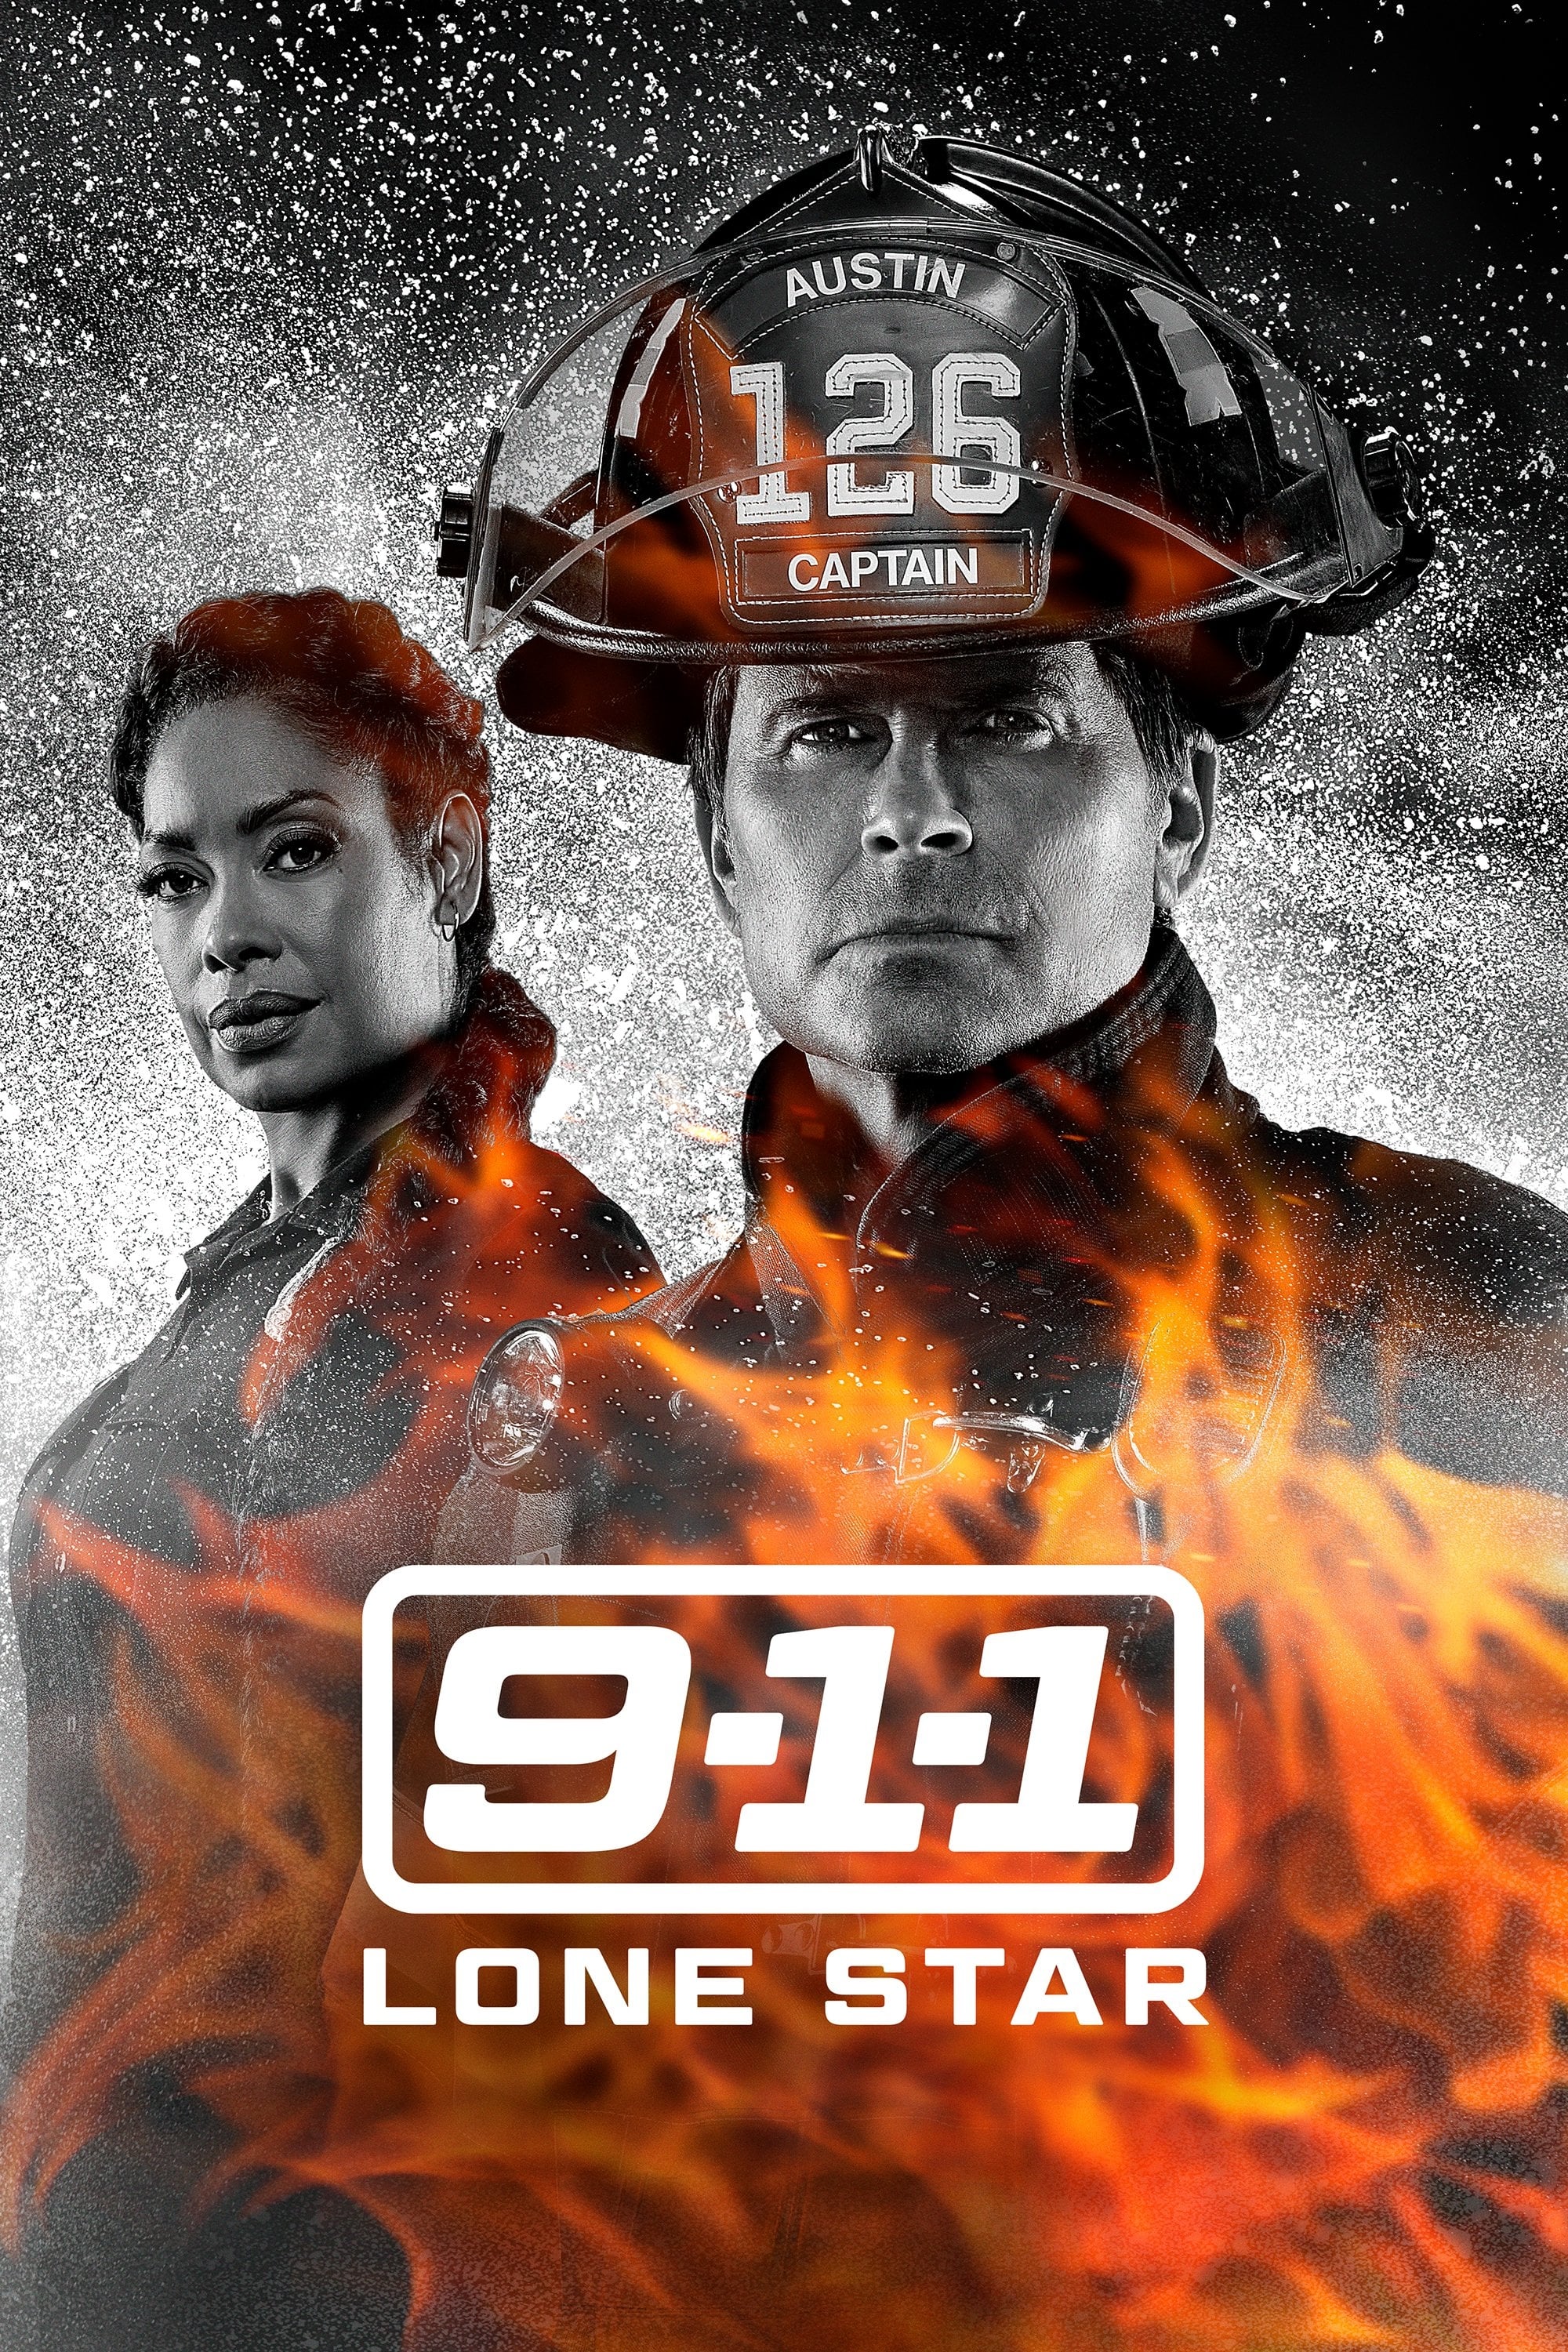 9-1-1: Lone Star TV Shows About Texas